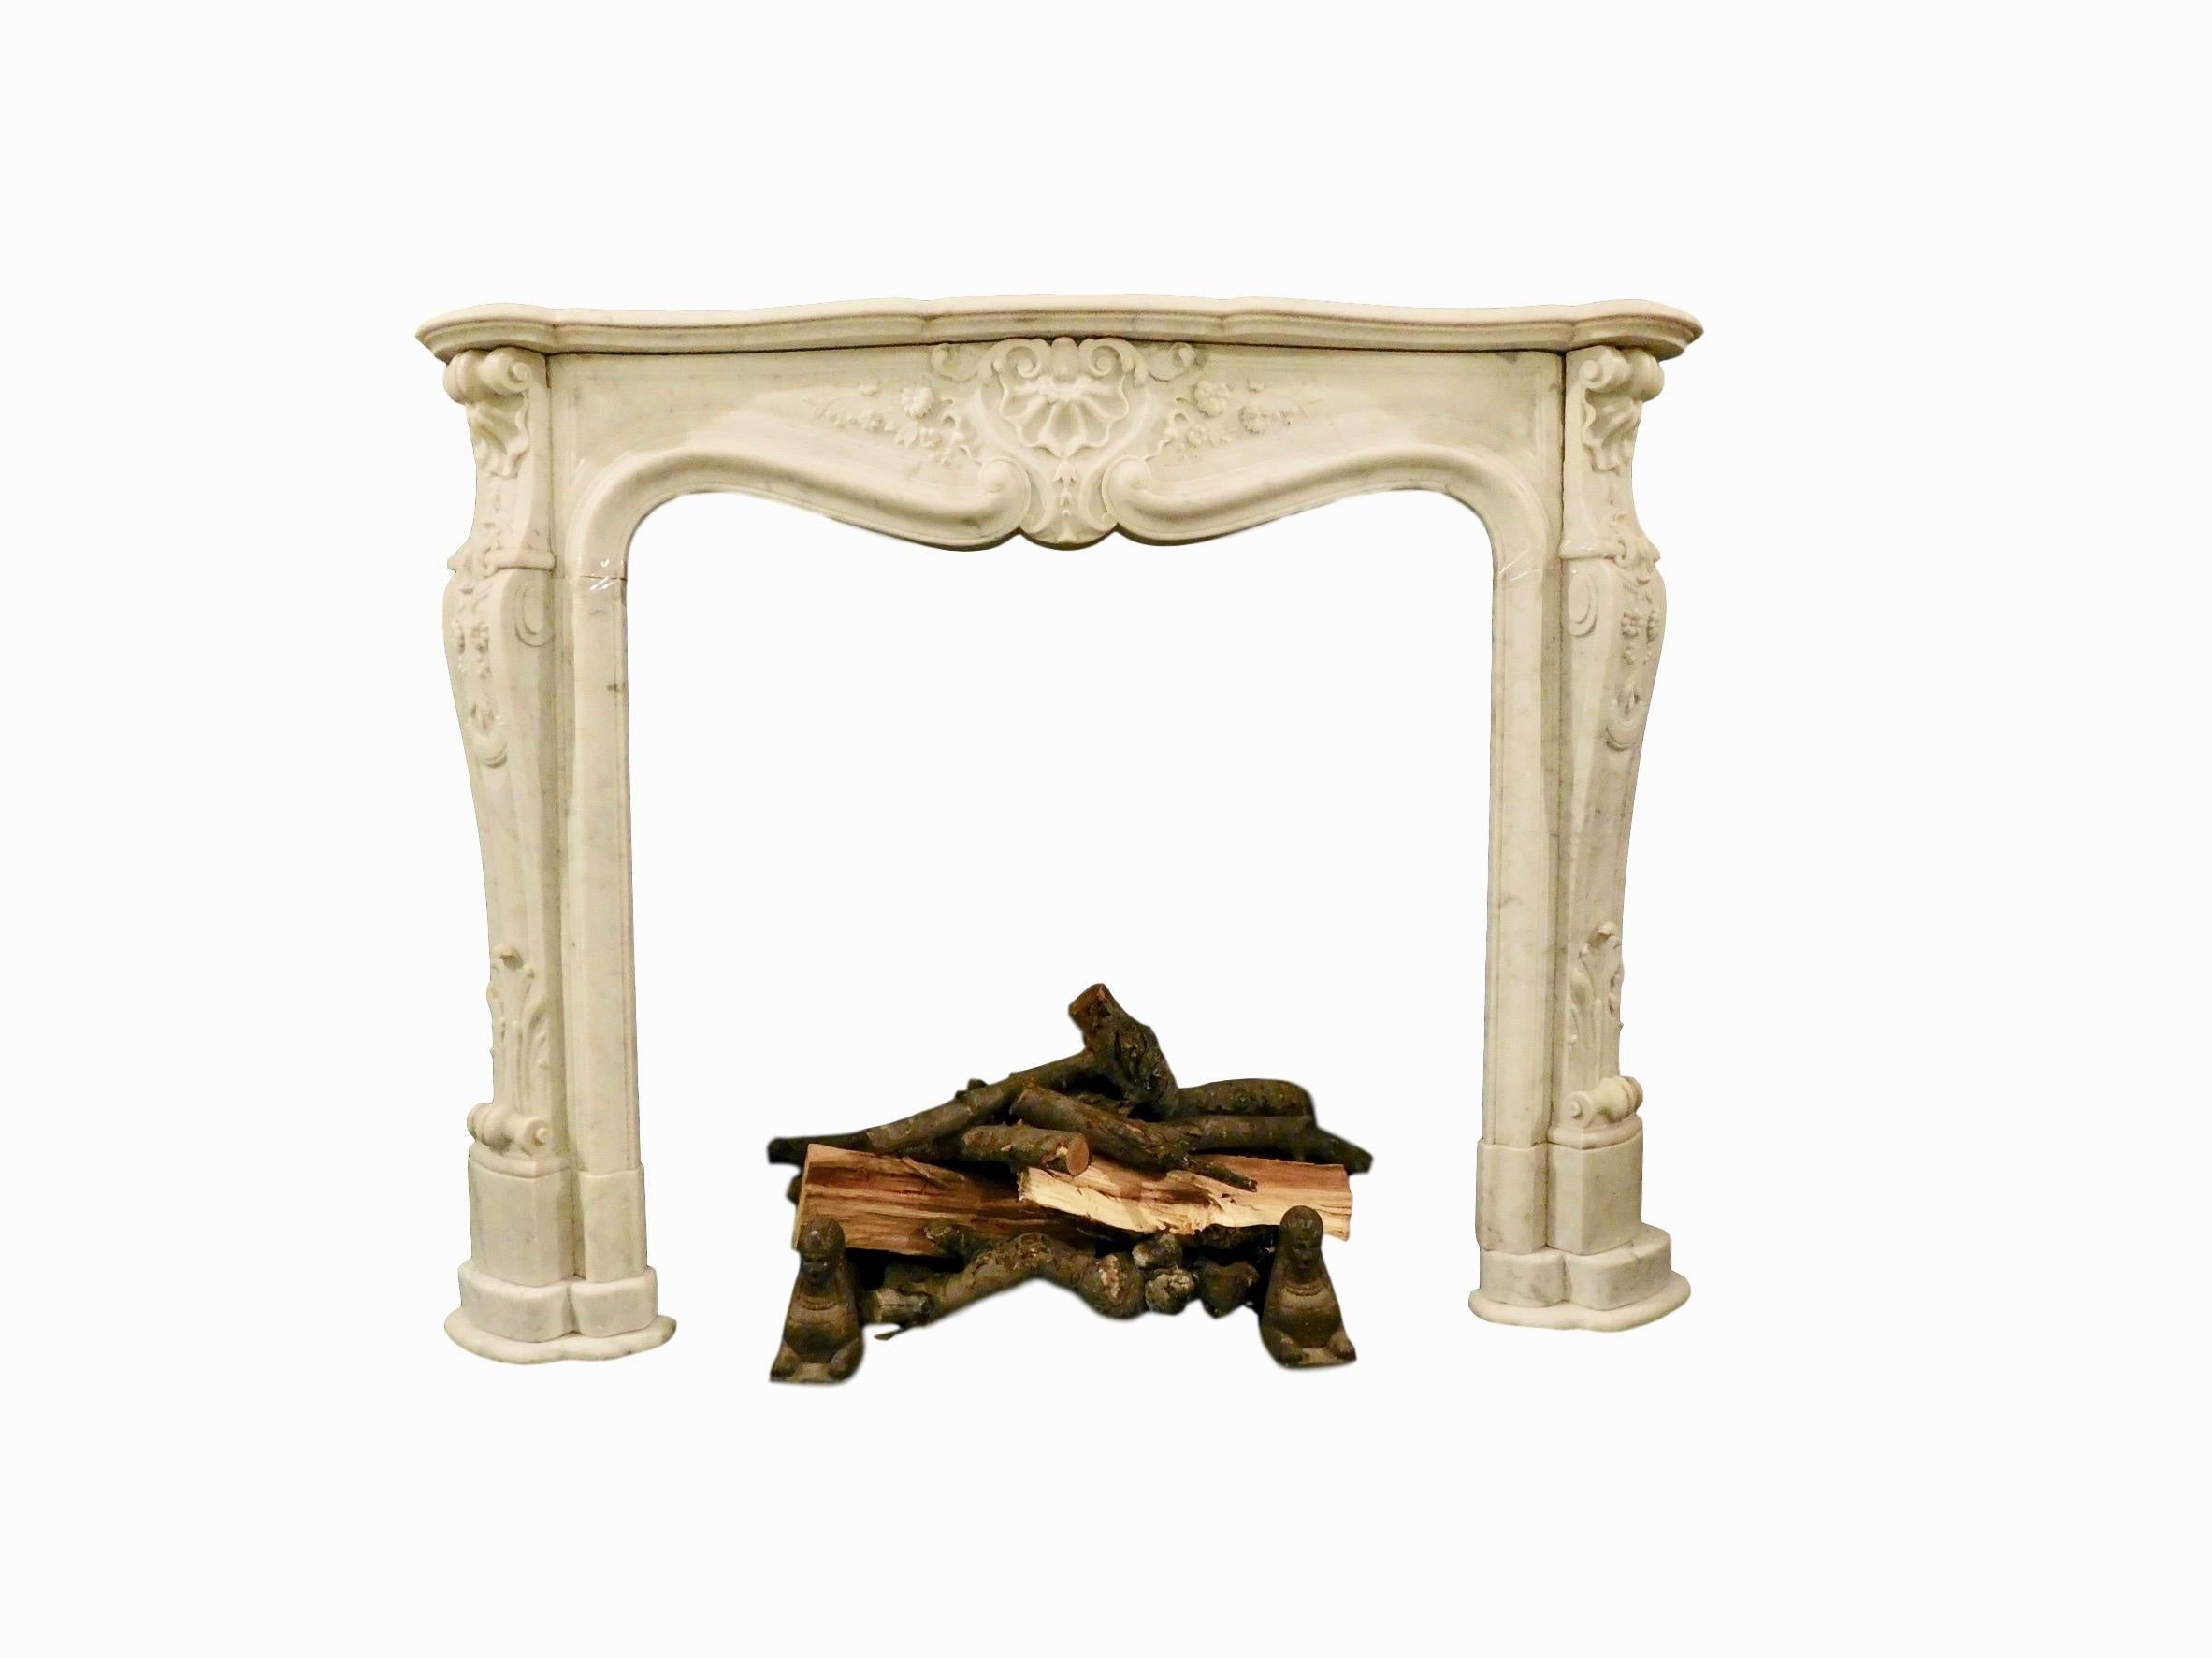 An important French Louis XV Carrara marble fireplace mantel. Serpentine top surface shelf, supported with intricately carved jambs ending in an acanthus leaf headed scrolled foot, the upper portion of jamb with floral and foliage decoration